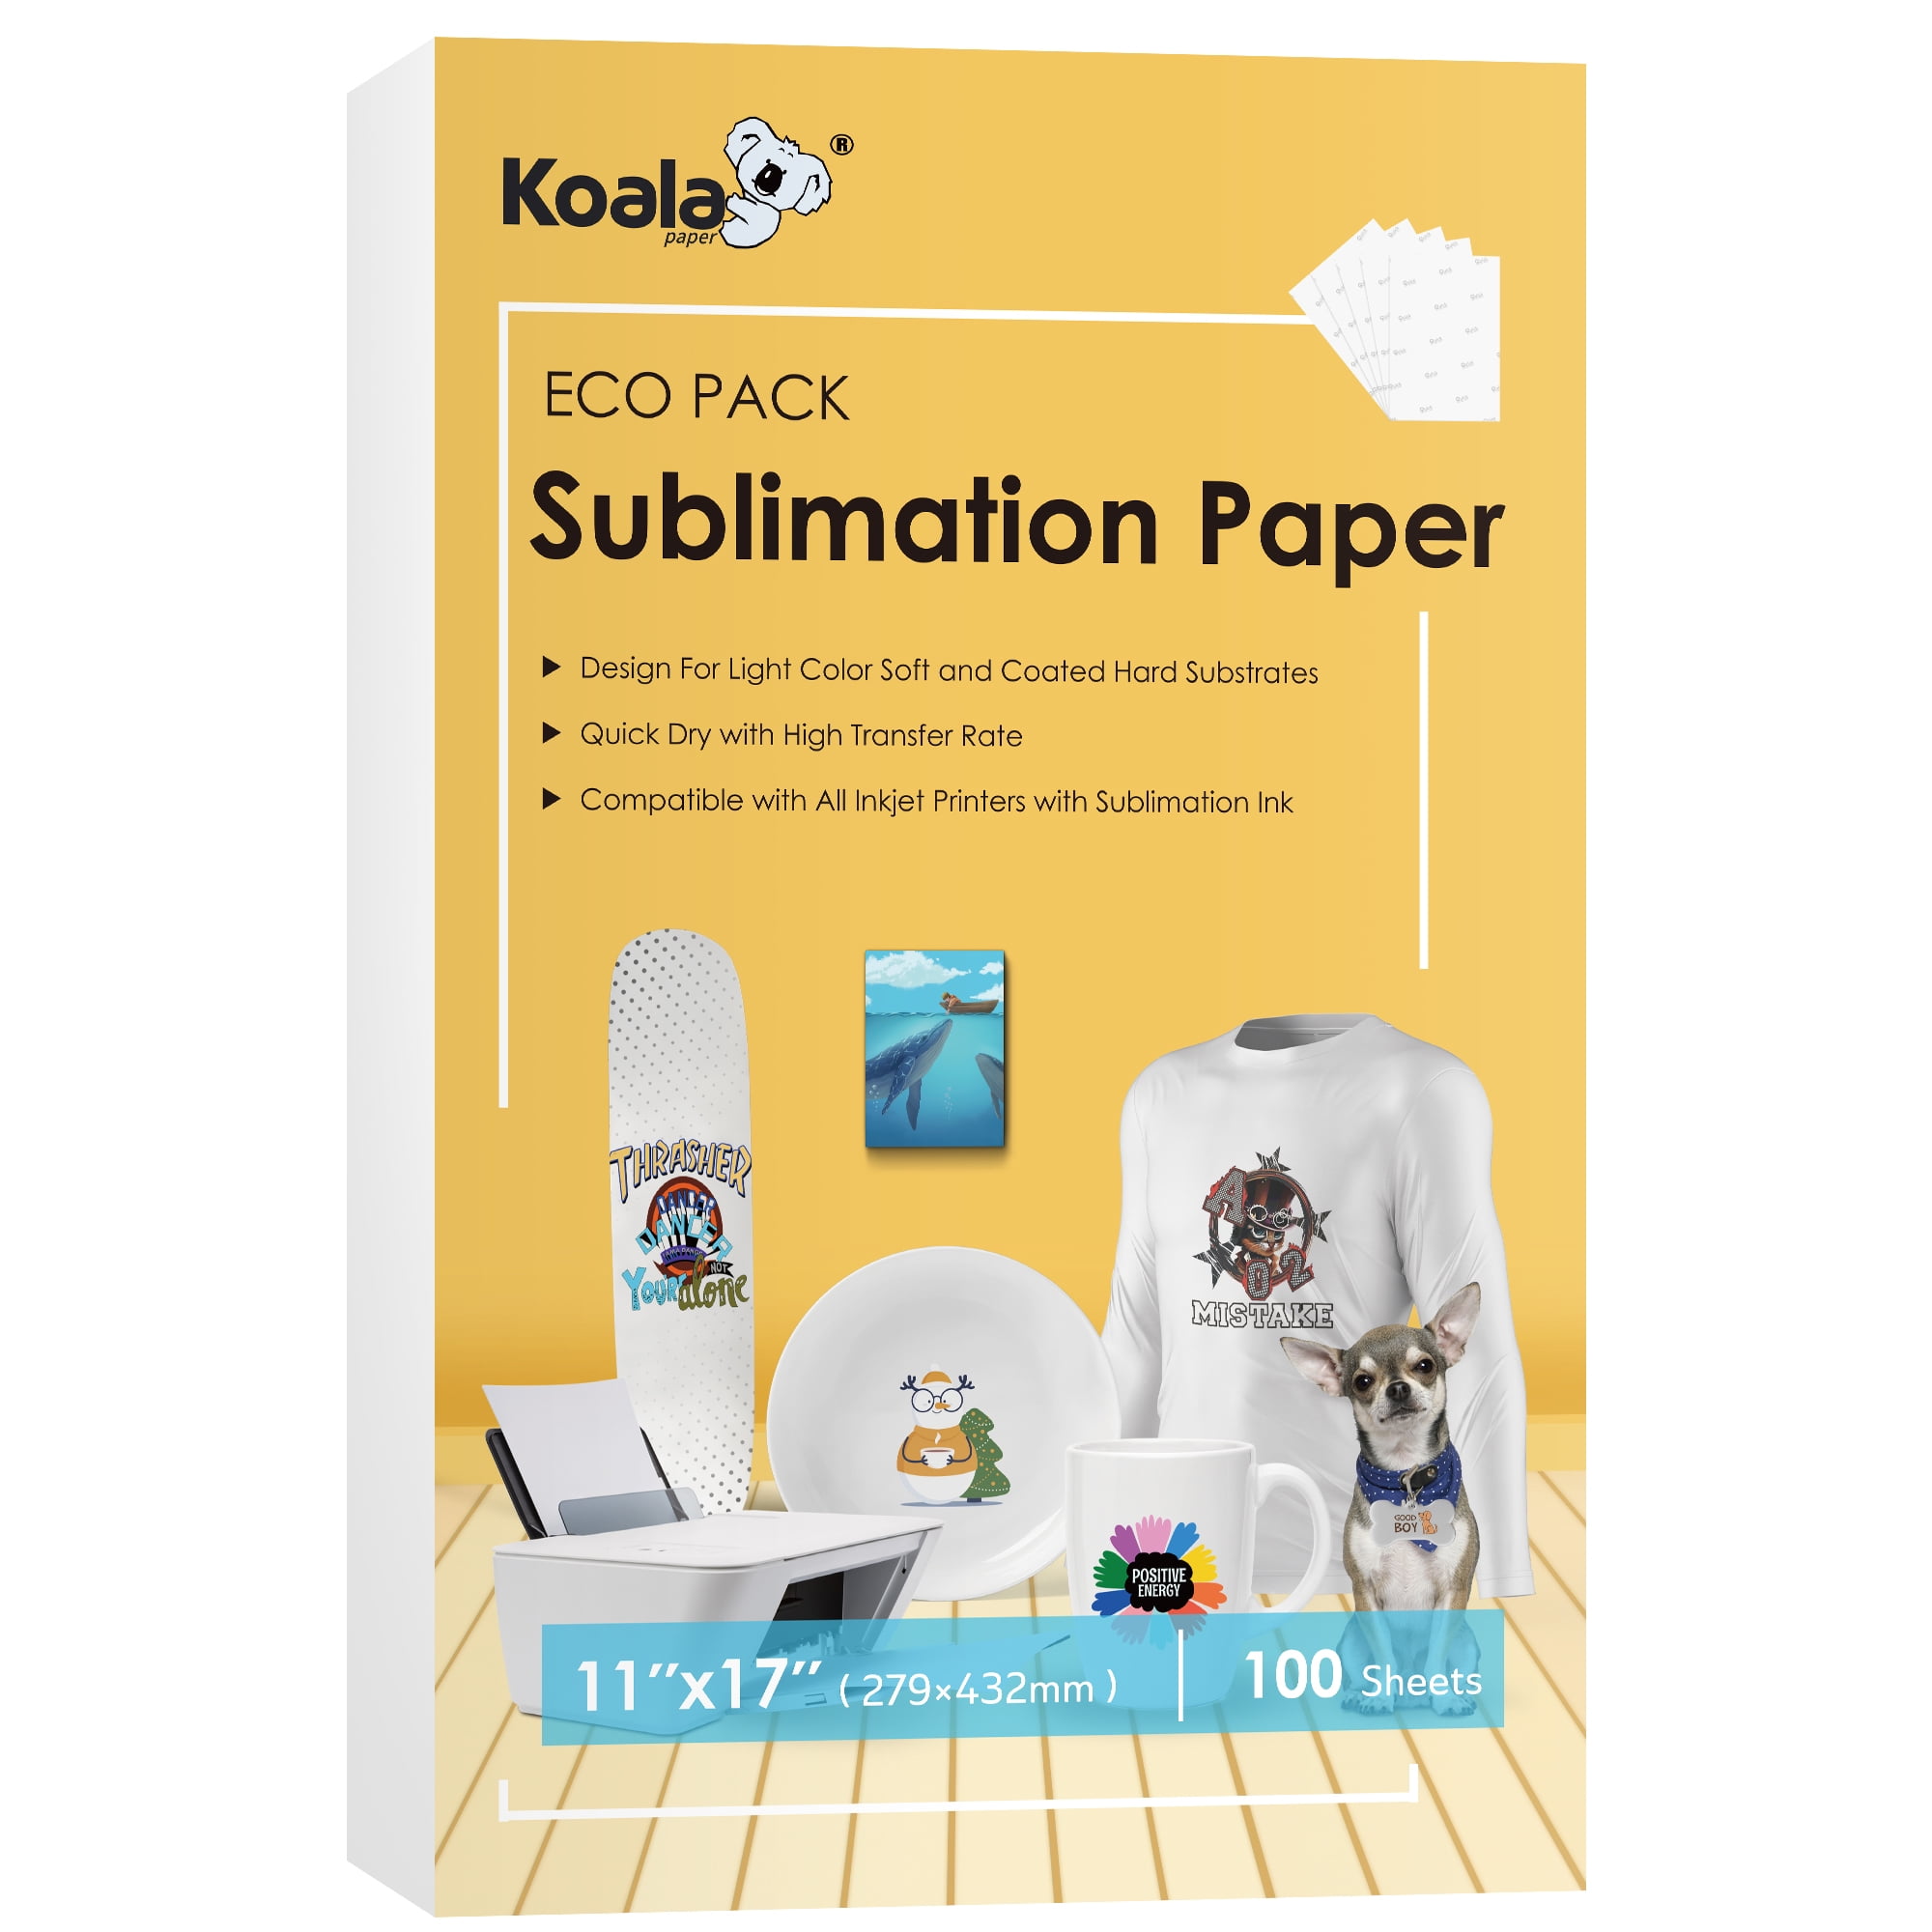 Koala Sublimation Paper and Dark Fabric Iron On Transfer Paper